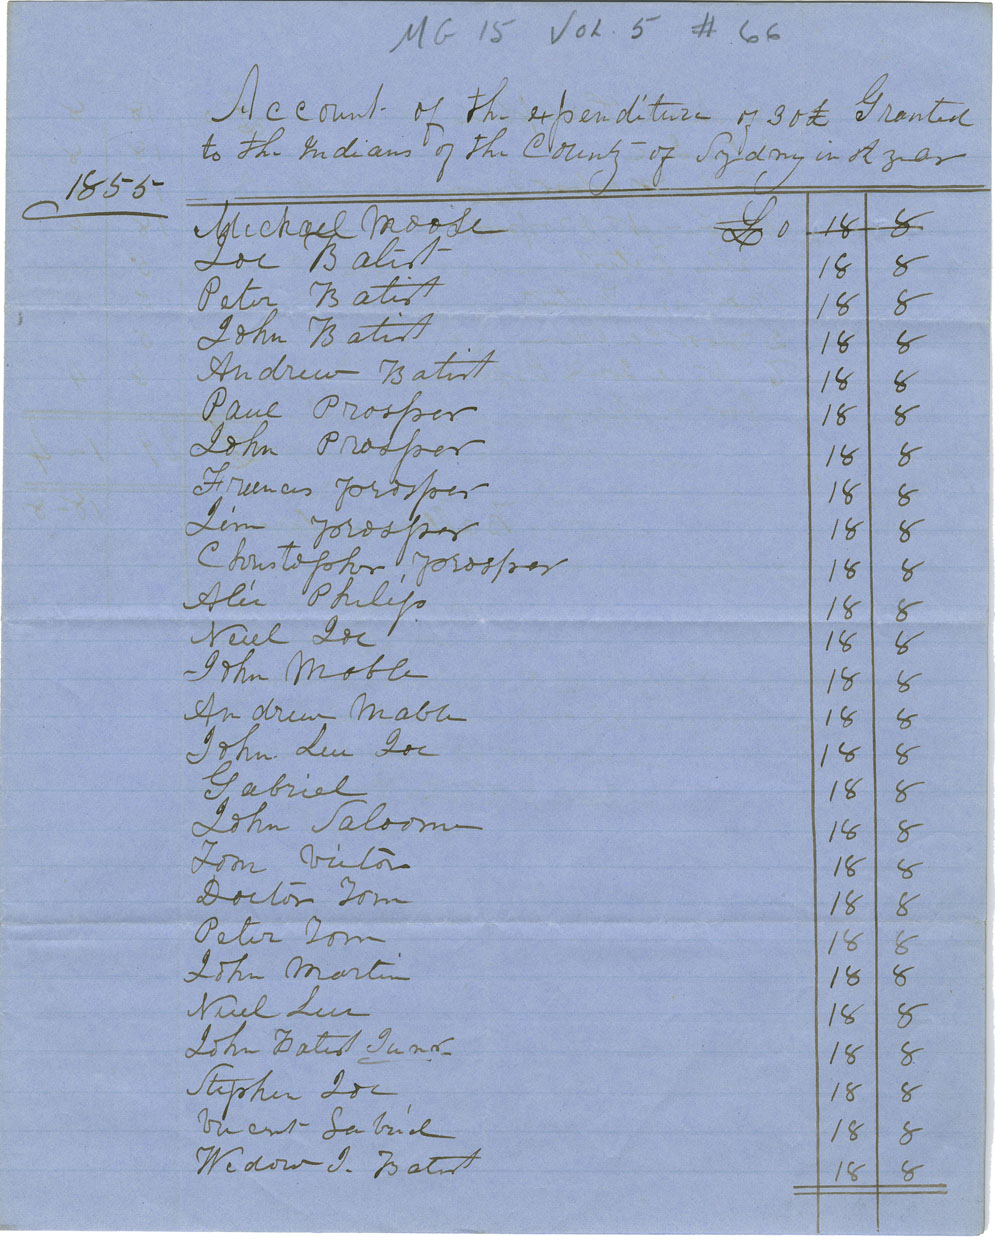 Account of the expenditure of money granted to the Mi'kmaq of Sydney County.